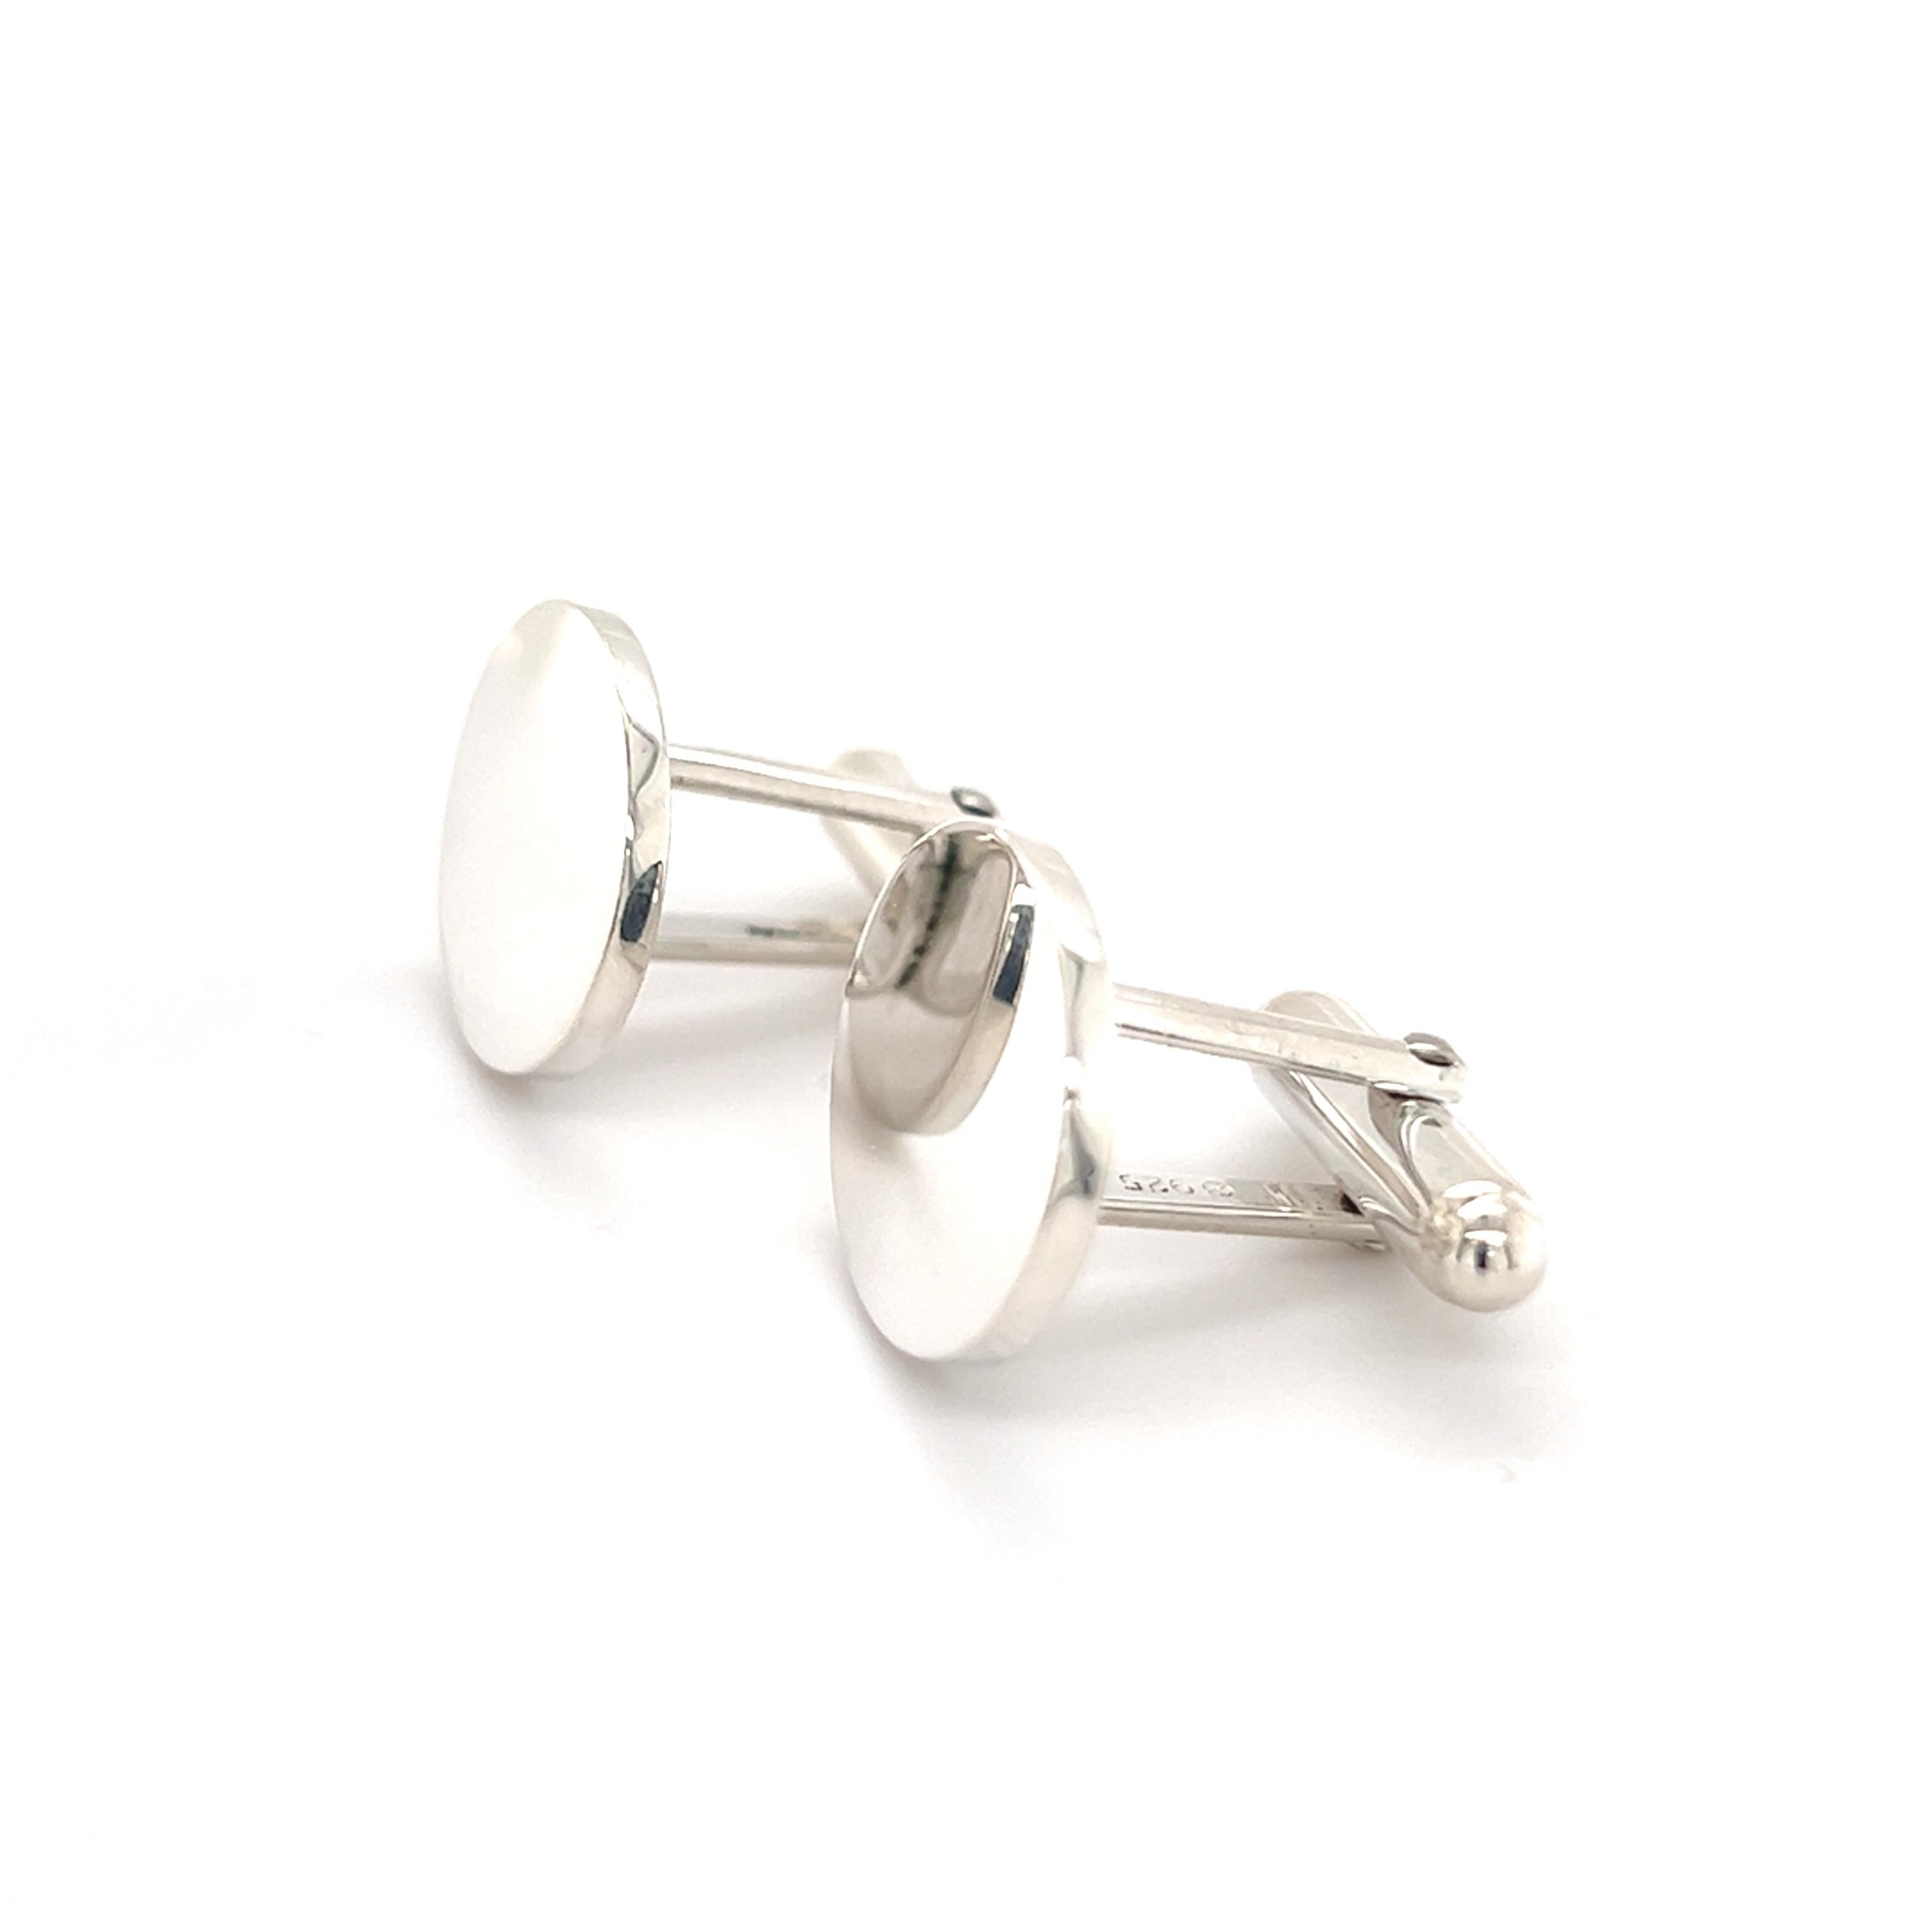 Tiffany & Co Estate Sterling Silver Cufflinks 12 Grams In Good Condition For Sale In Brooklyn, NY